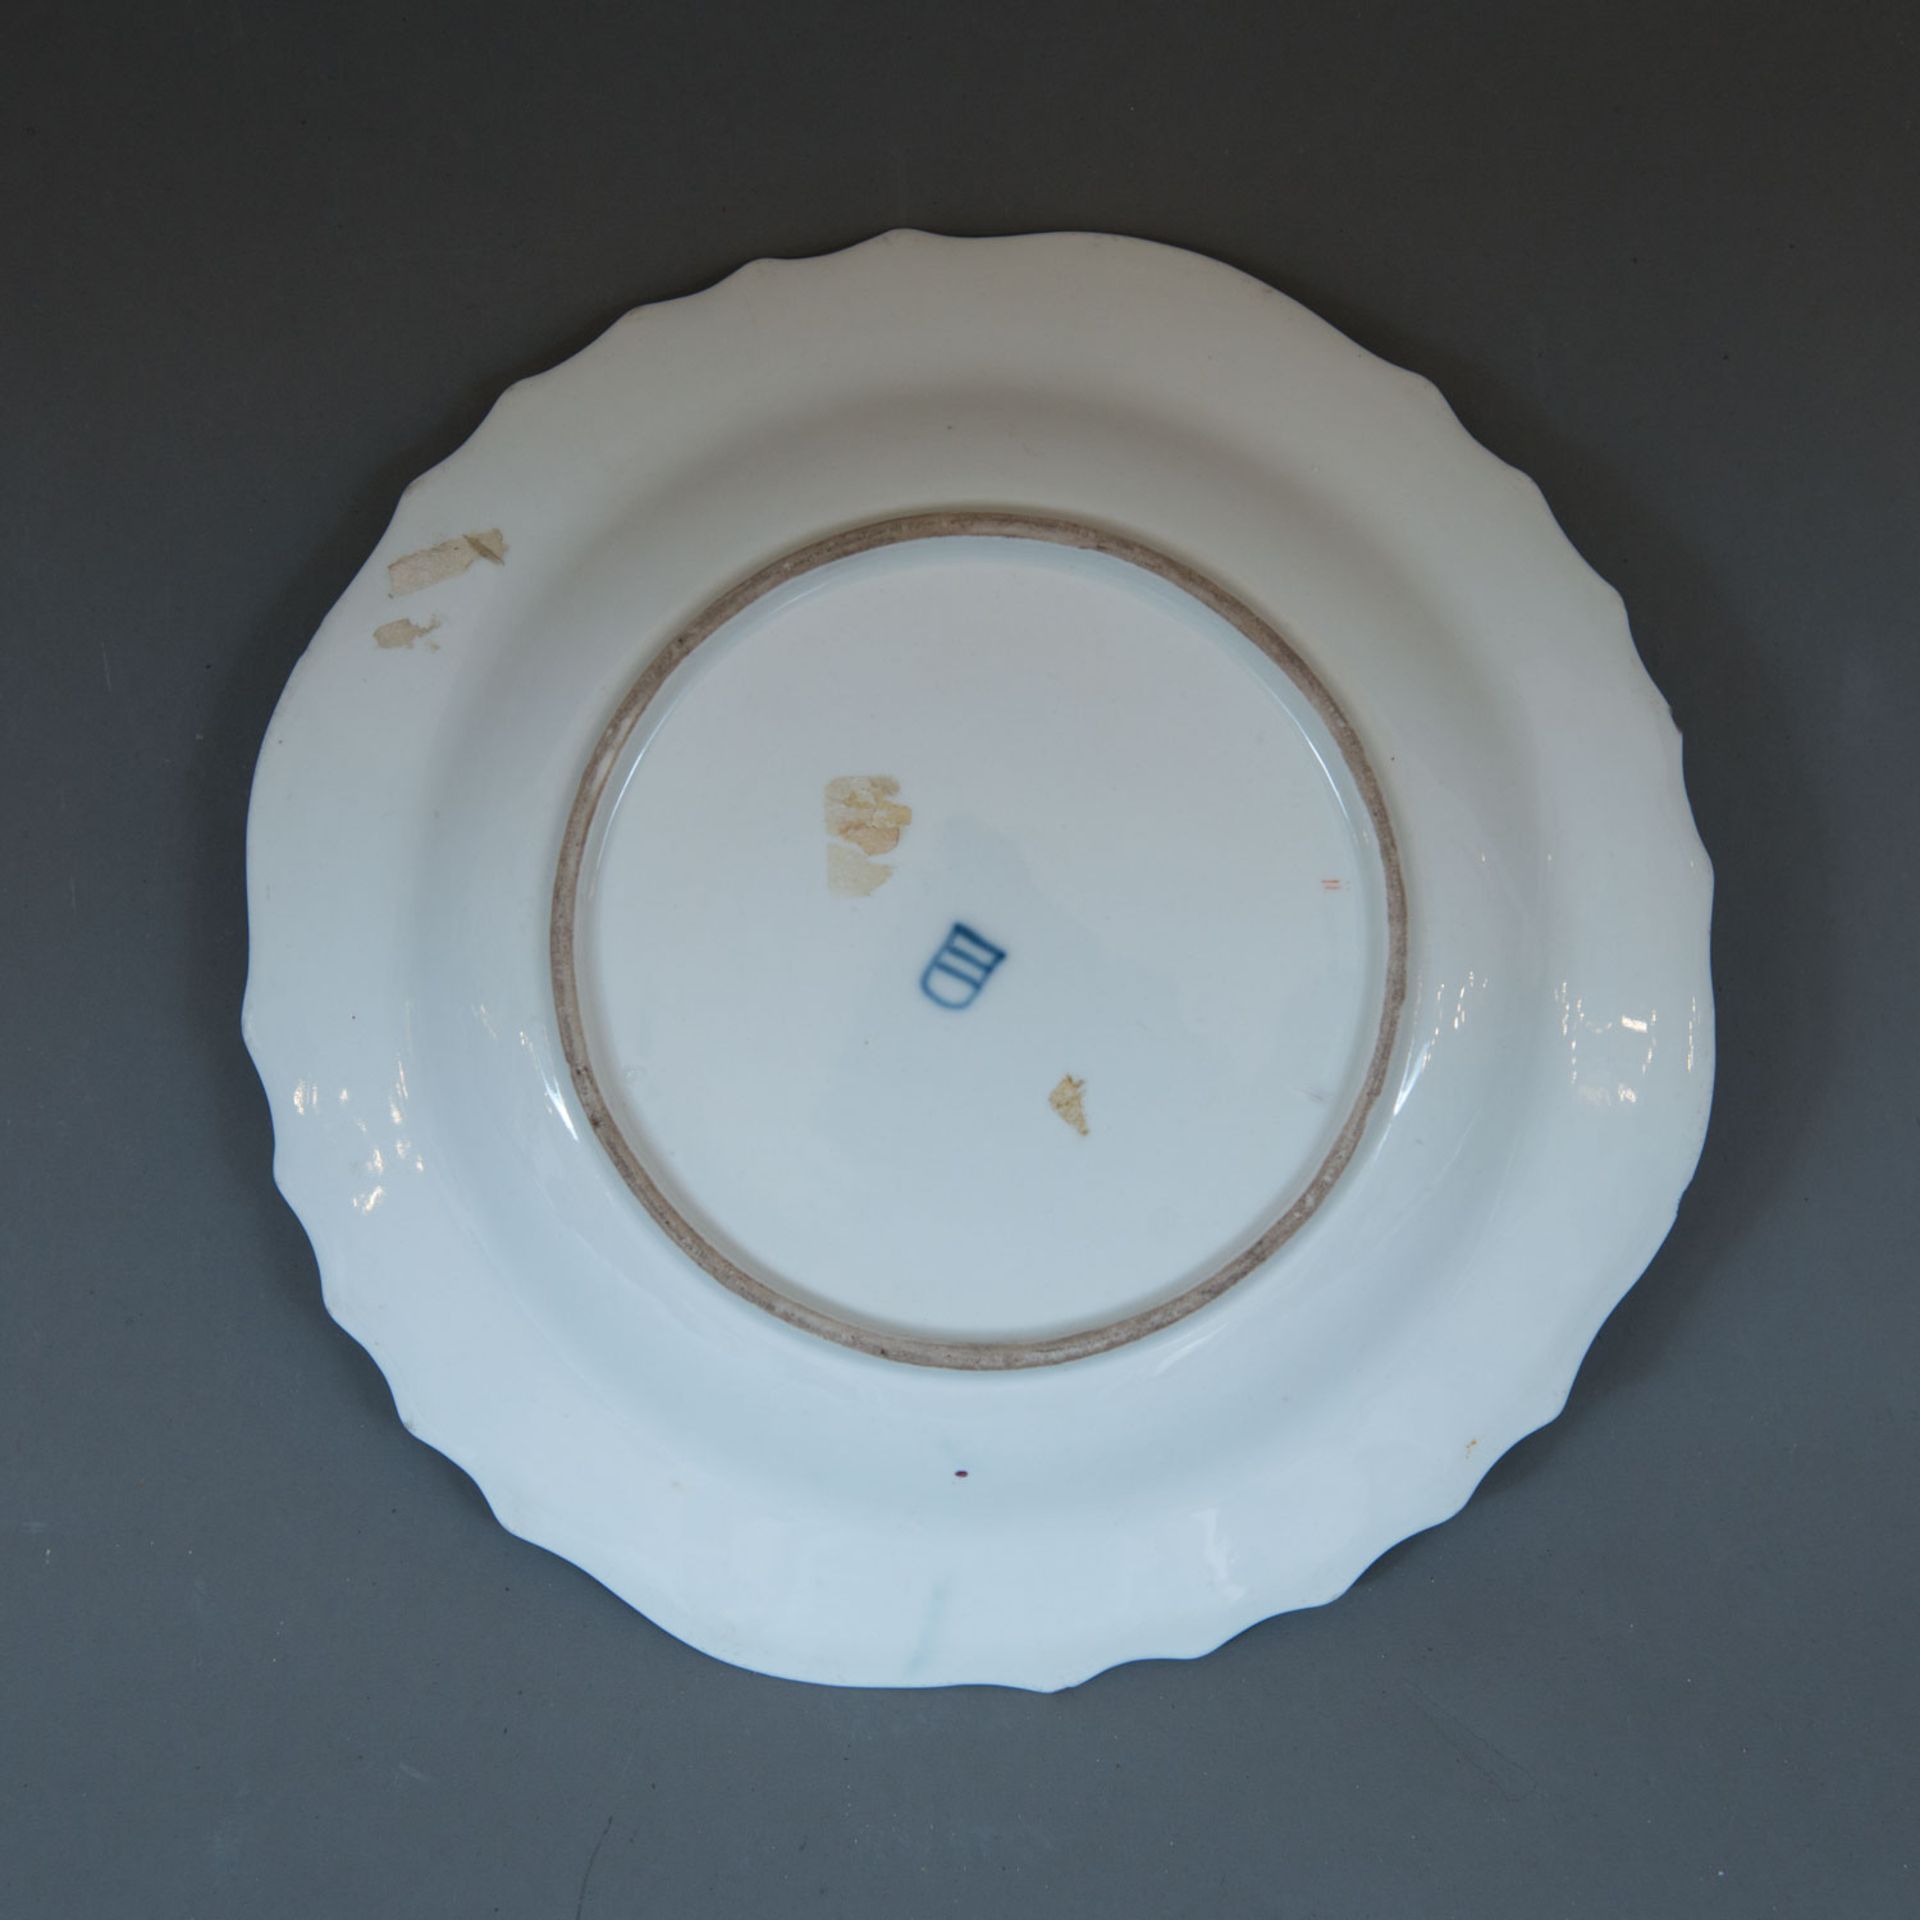 Pair of Vienna Porcelain Dishes - Image 3 of 3